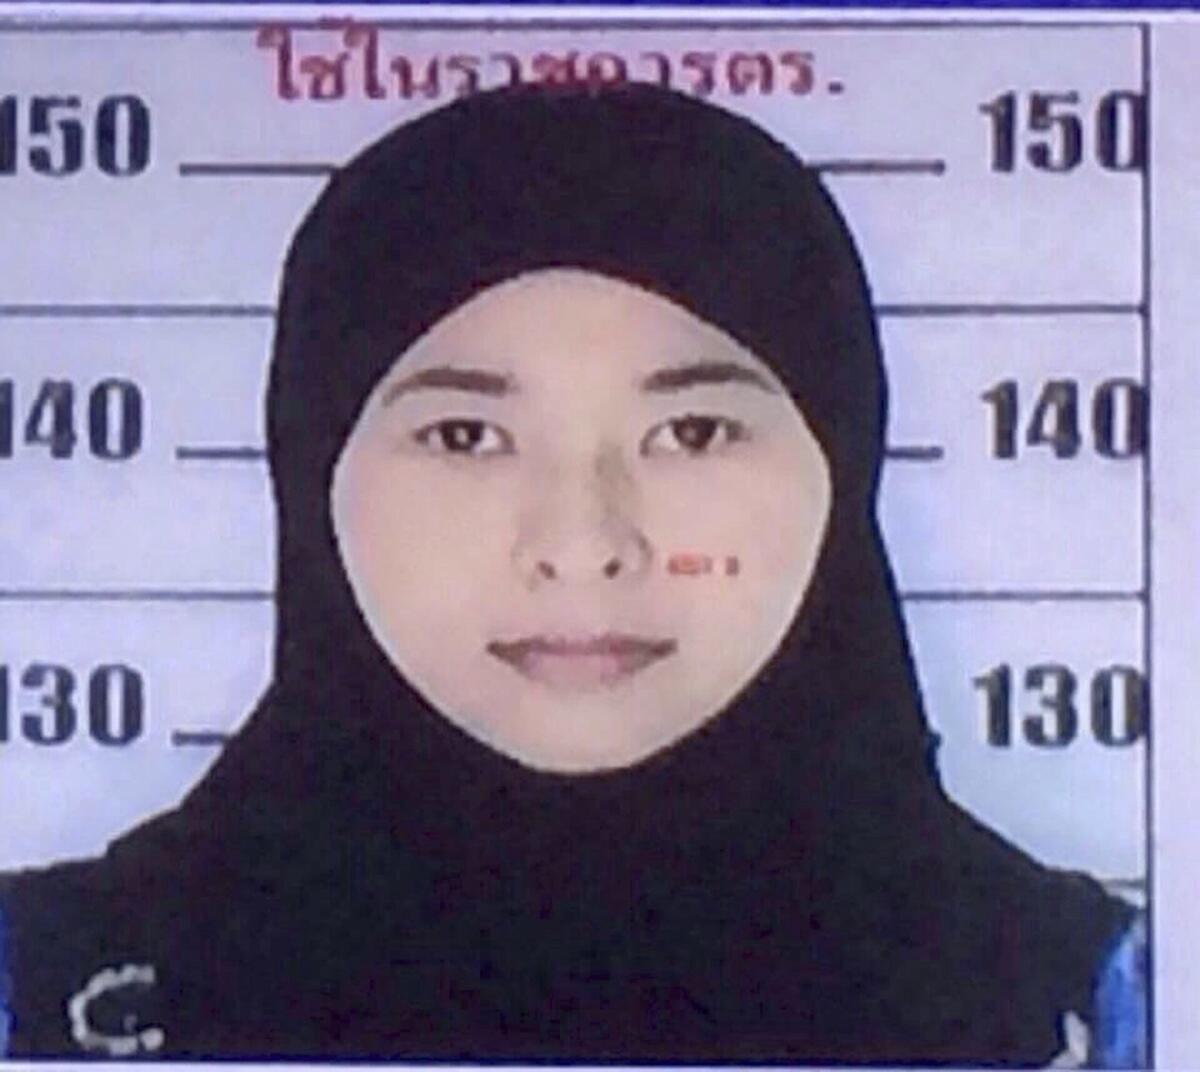 A photo released by Thai authorities on Aug. 31, 2015, shows Wanna Suansun, identified as one of two new suspects in a deadly bombing in Bangkok.